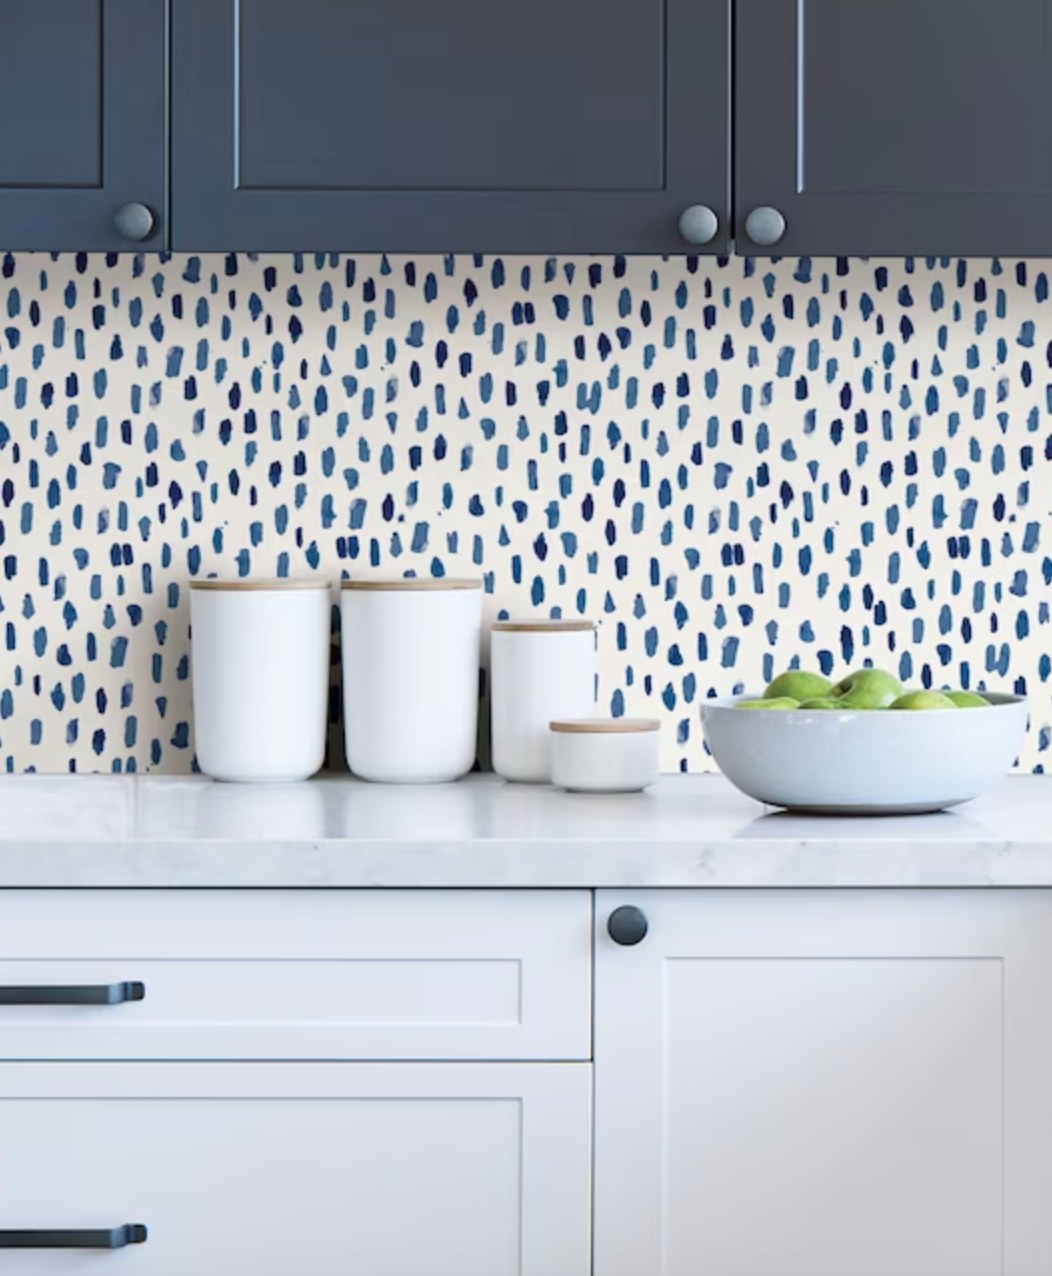 the blue irregular dotted wallpaper on the backsplash of a decorated kitchen